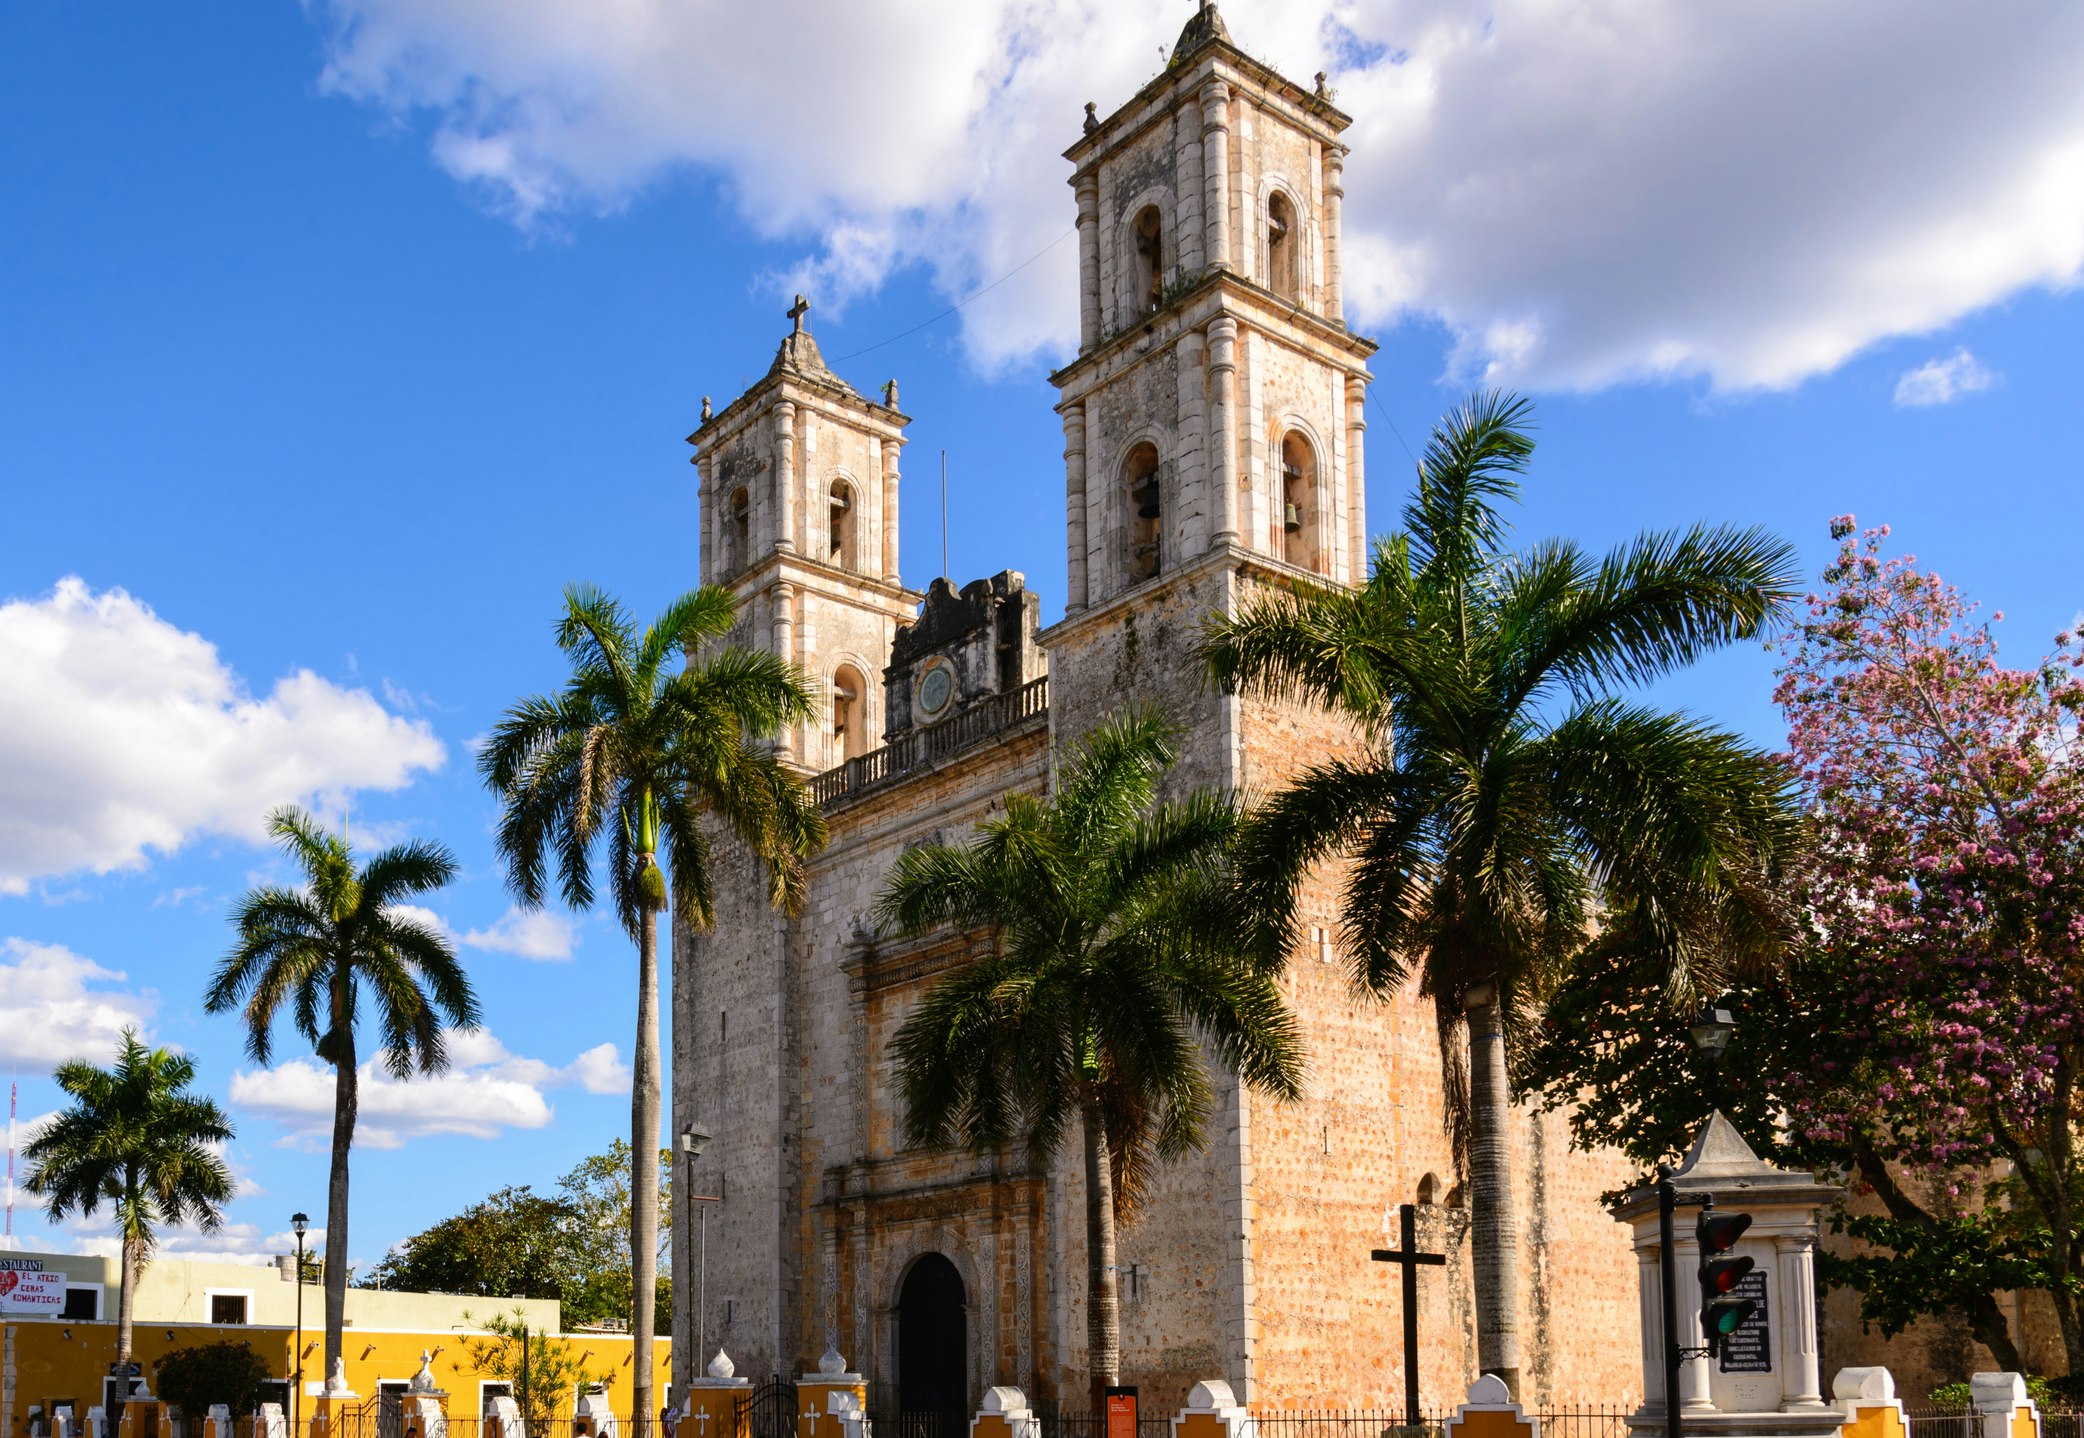 The Catedral de San Servasio in the plaza mayor of Vallodolid Mexico consists of two square stone towers on either side of a front facade with an arch shaped door in the center. The towers have two arch shaped windows on each side. Palm trees grow on the street in front of the church against a blue sky.  